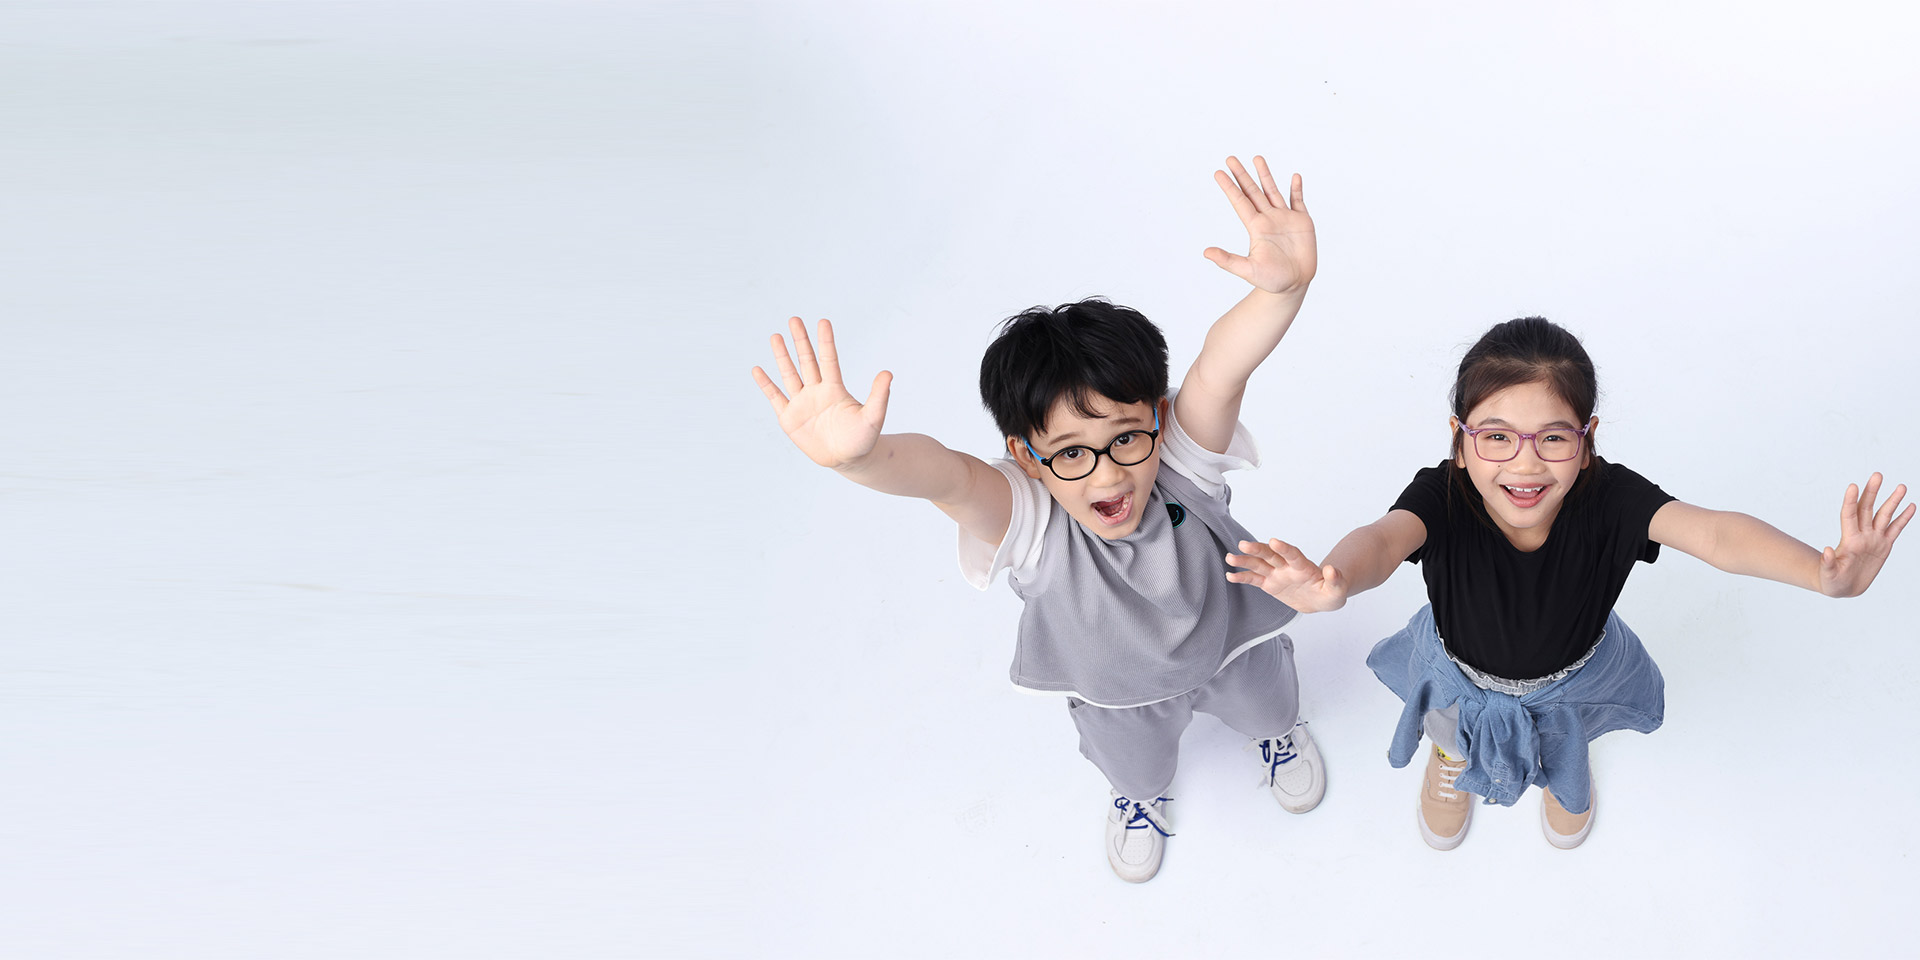 A boy and a girl, both wearing glasses, are looking up and putting their hands up in the air.